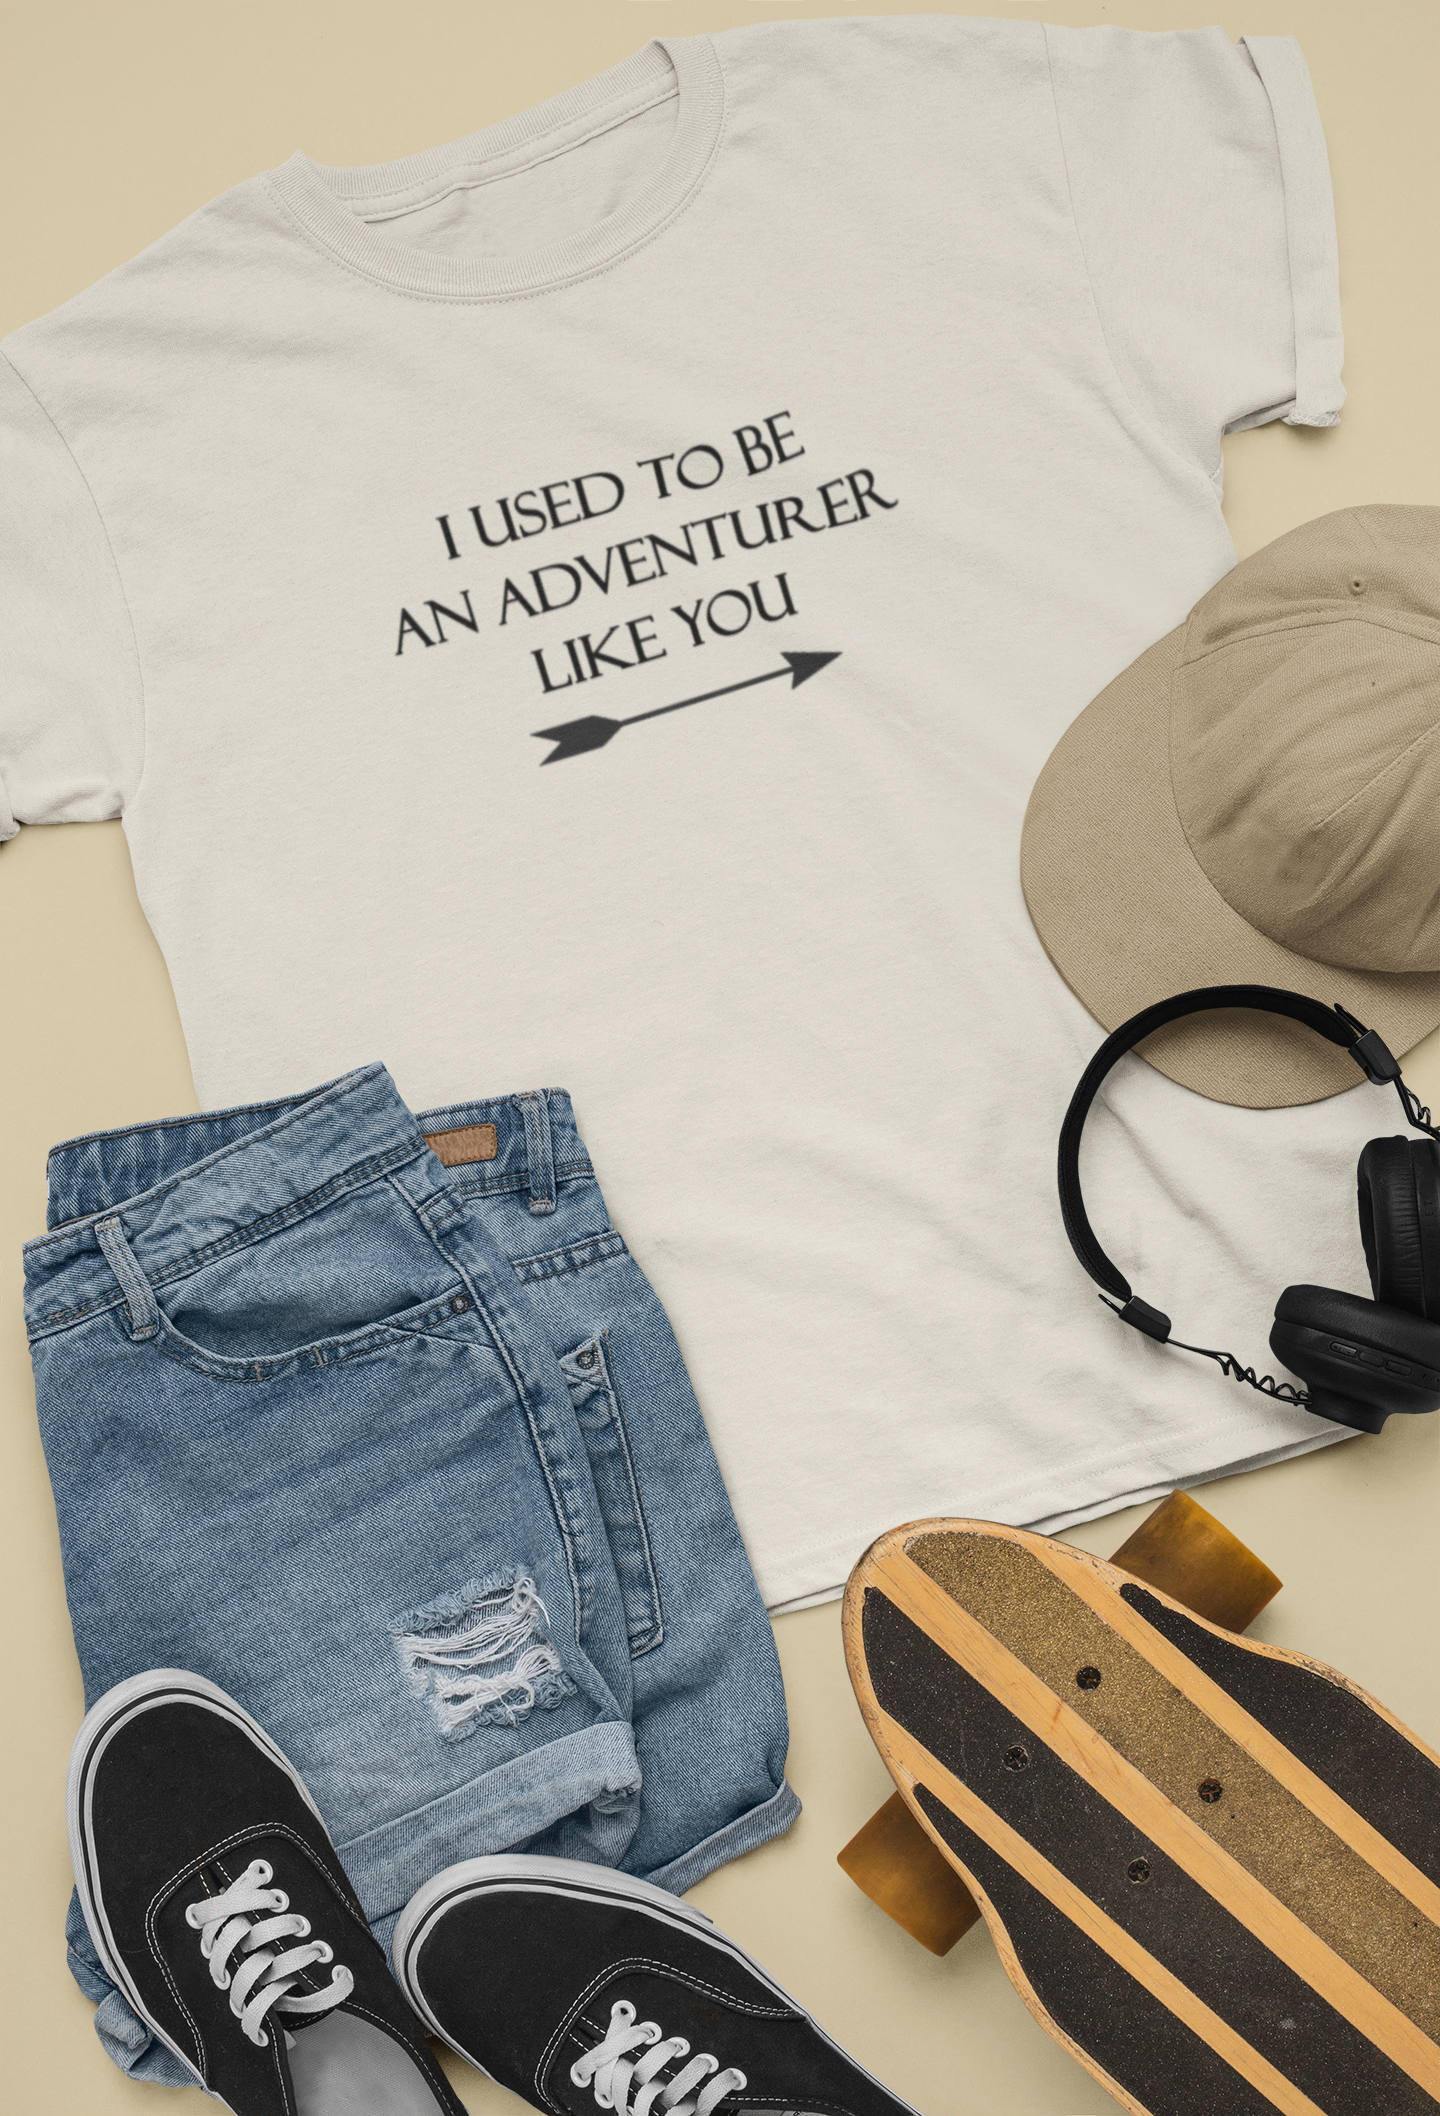 I Used to Be an Adventurer Like You T-Shirt | Gift for Gamers, Gamer Shirt, Nerdy Gifts, Video Gamer T-Shirt